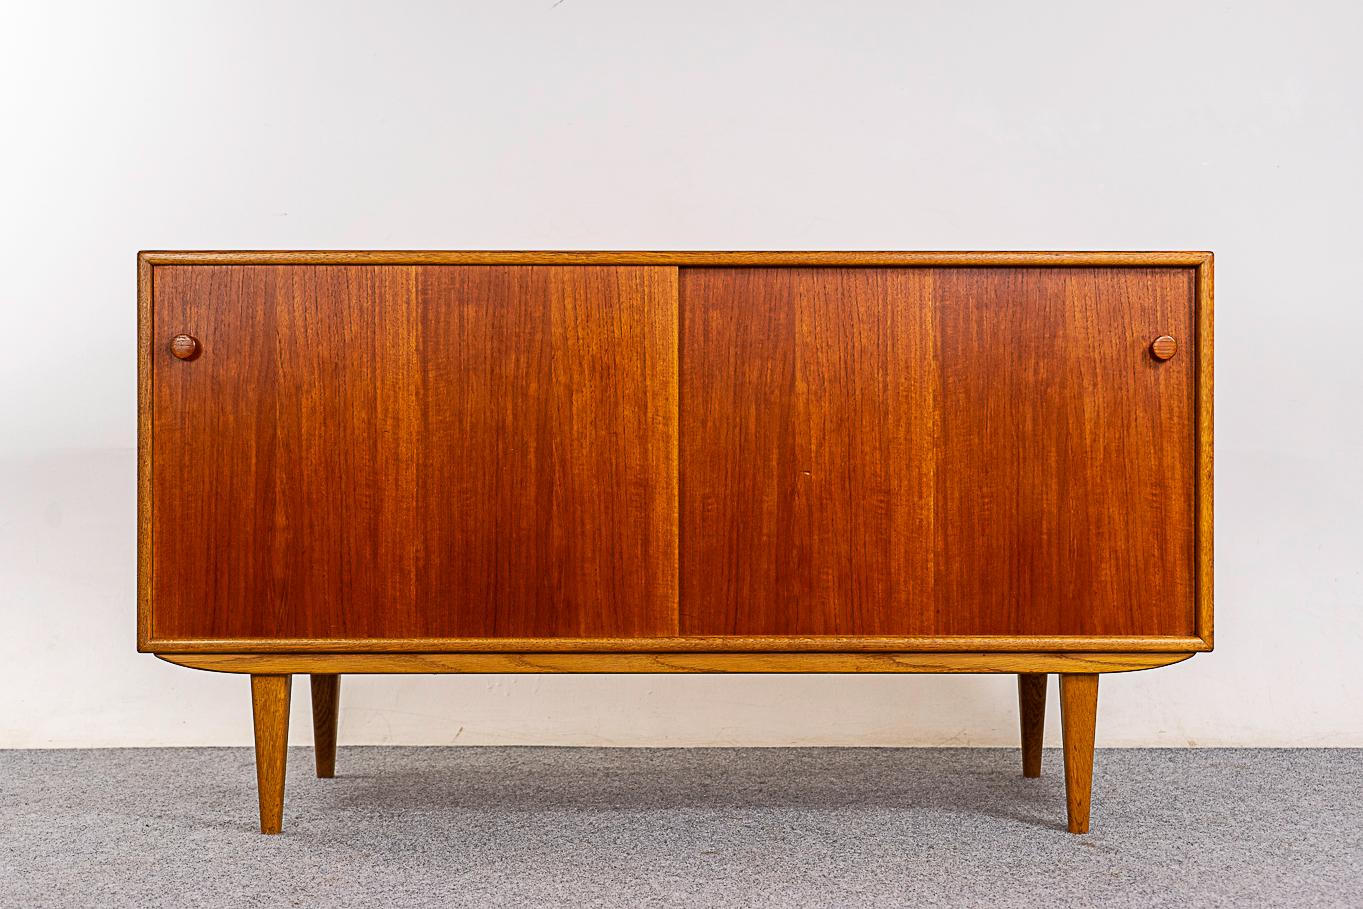 Teak & oak Danish sideboard, circa 1960's. Sleek lines in beautiful teak with contrasting solid oak trim and legs. Height adjustable shelving and removable legs.

Unrestored item with option to purchase in restored condition for an additional $300